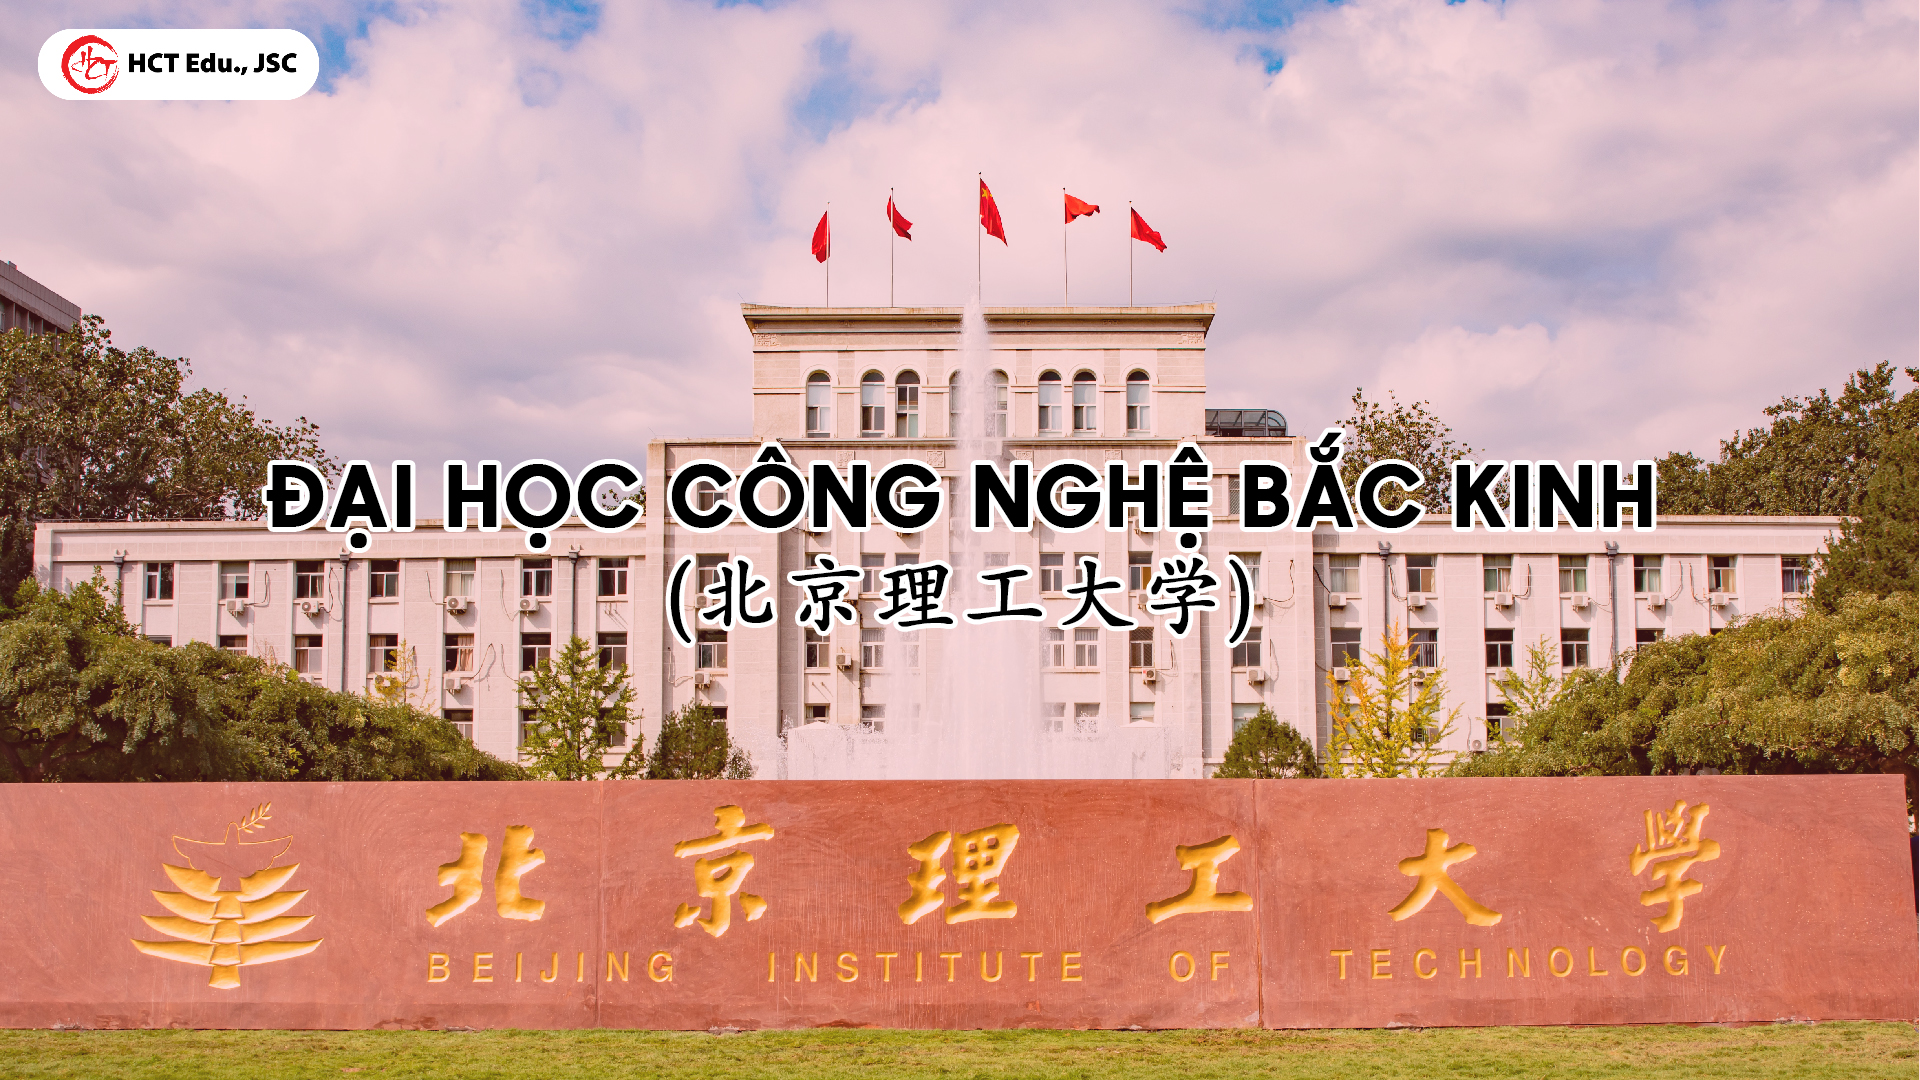 dai hoc cong nghe bac kinh beijing institute of technology